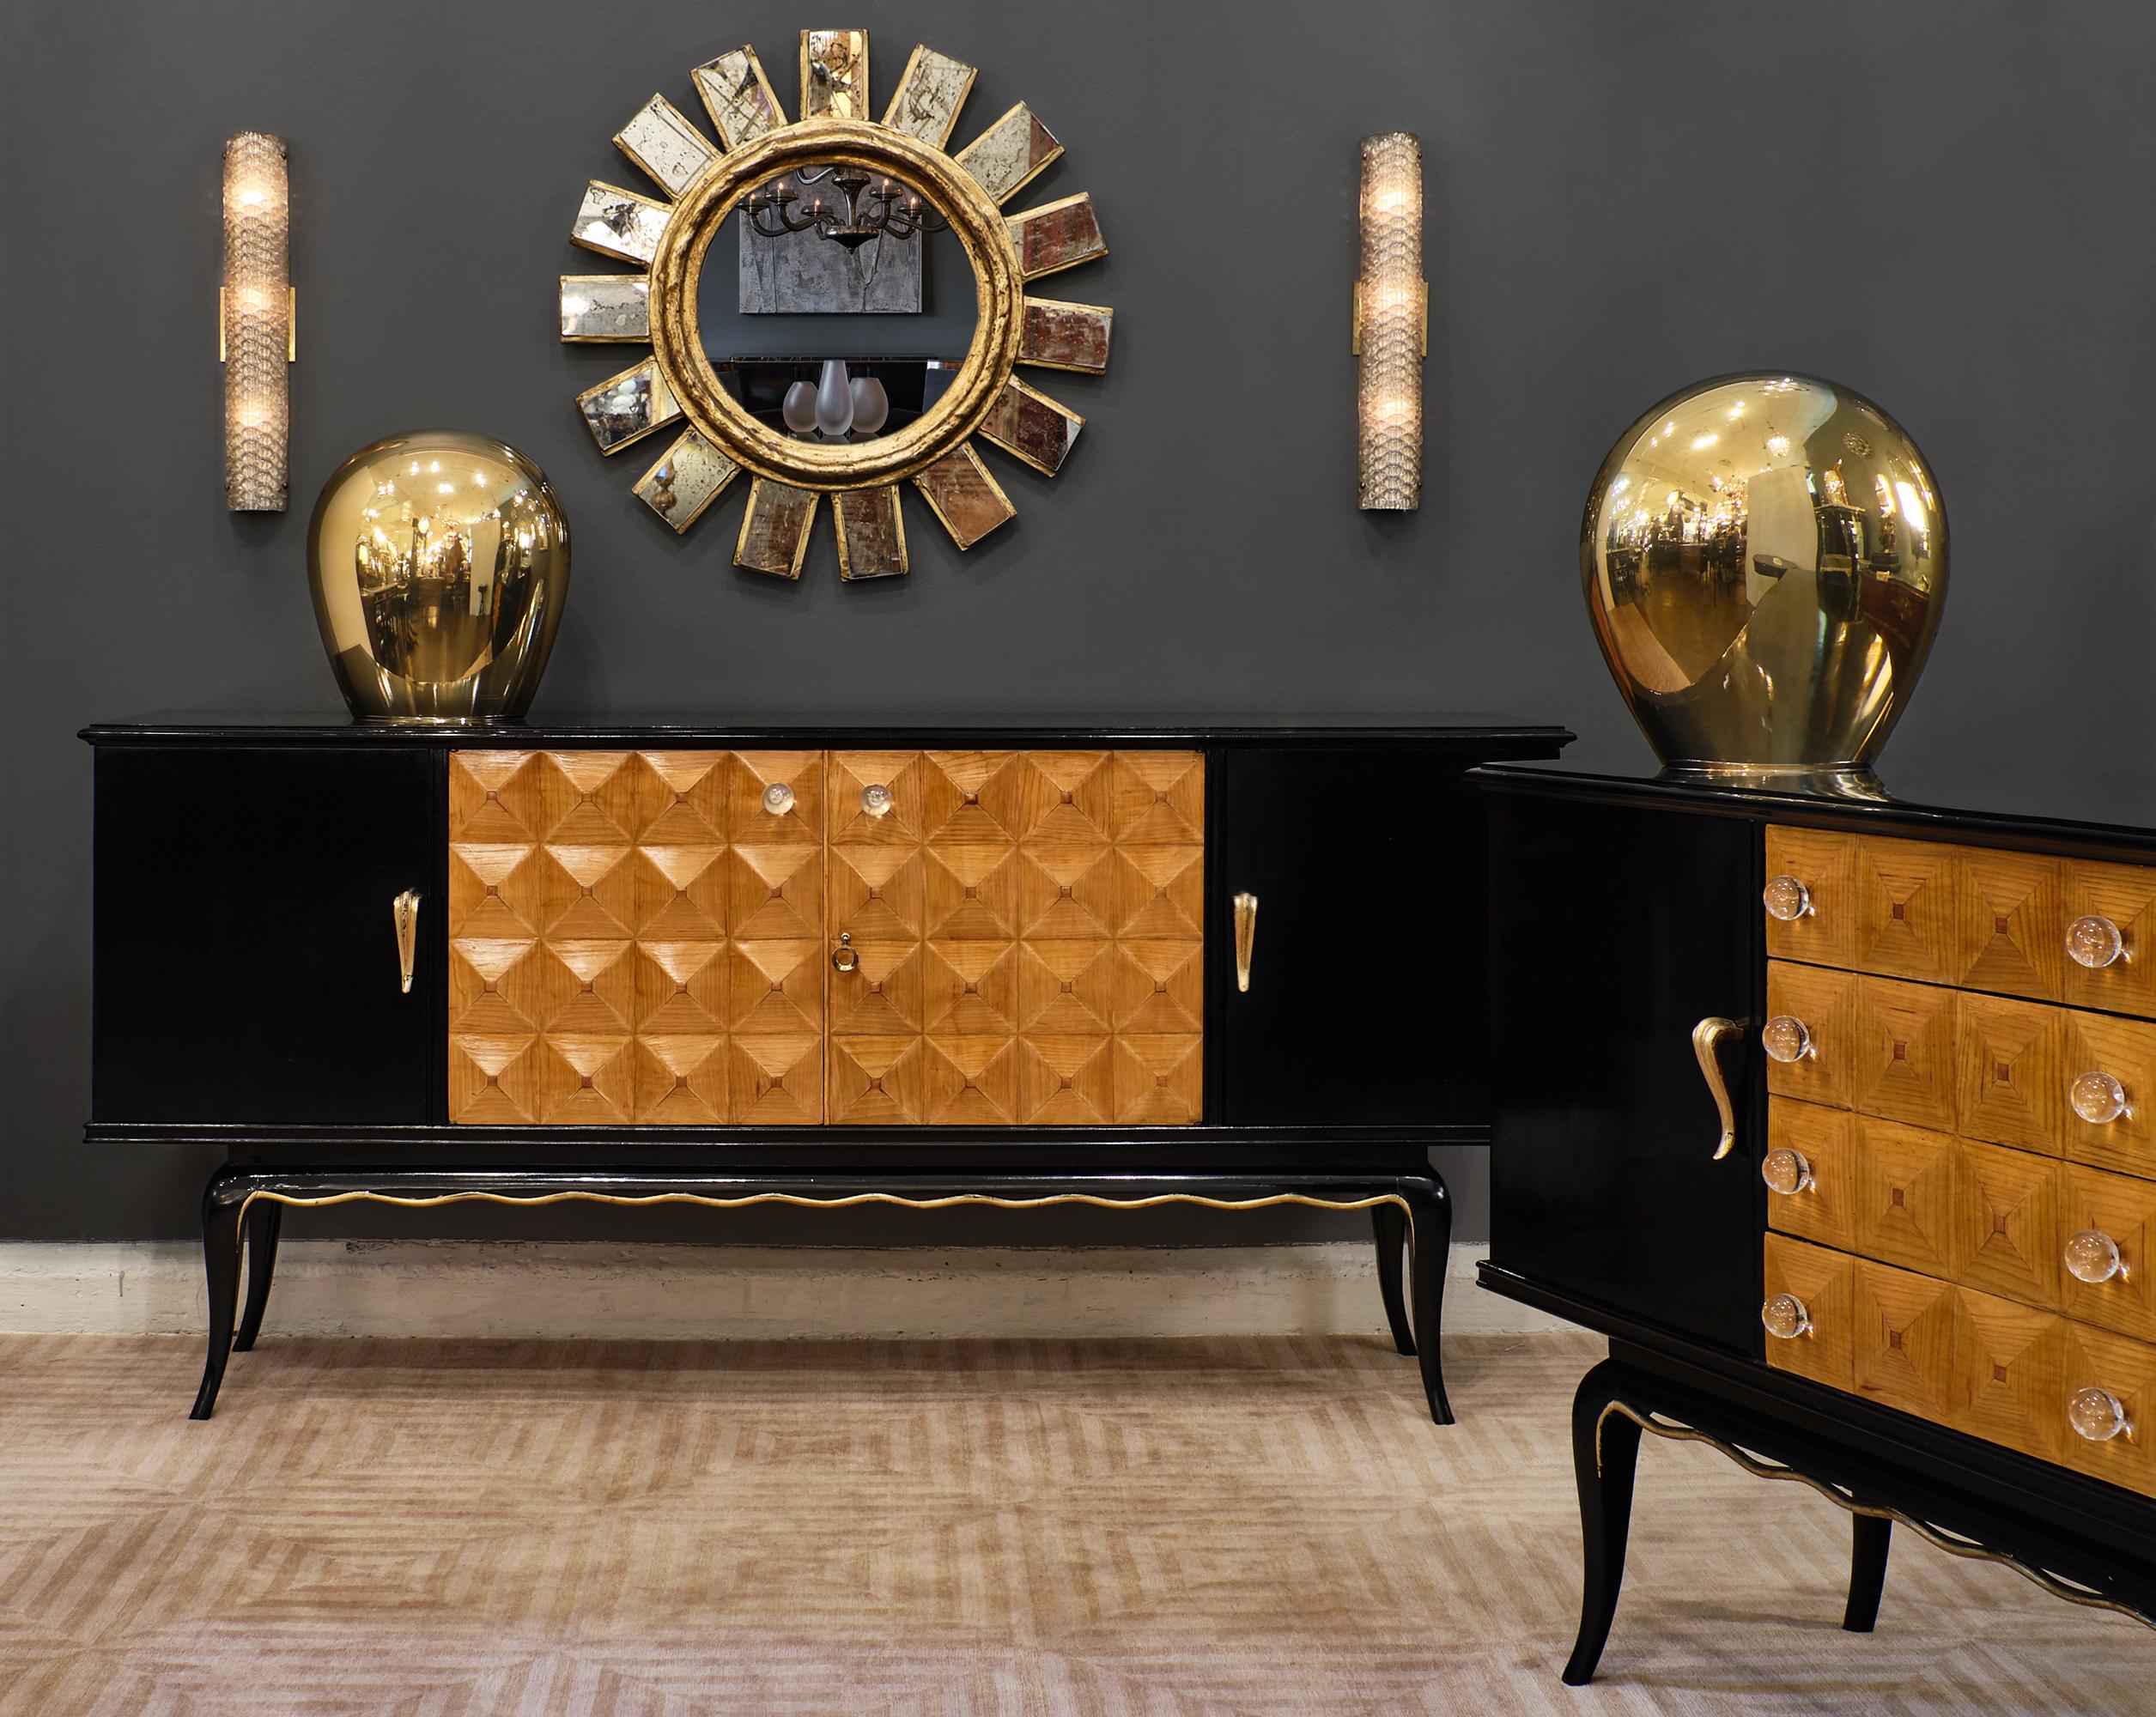 Paolo Buffa style Italian midcentury Buffet with an ebonized body and central doors adorned with a beautiful ash veneer in a diamond pattern. The texture gives them such elegant visual appeal and the knobs are hand blown Murano glass. The lock on